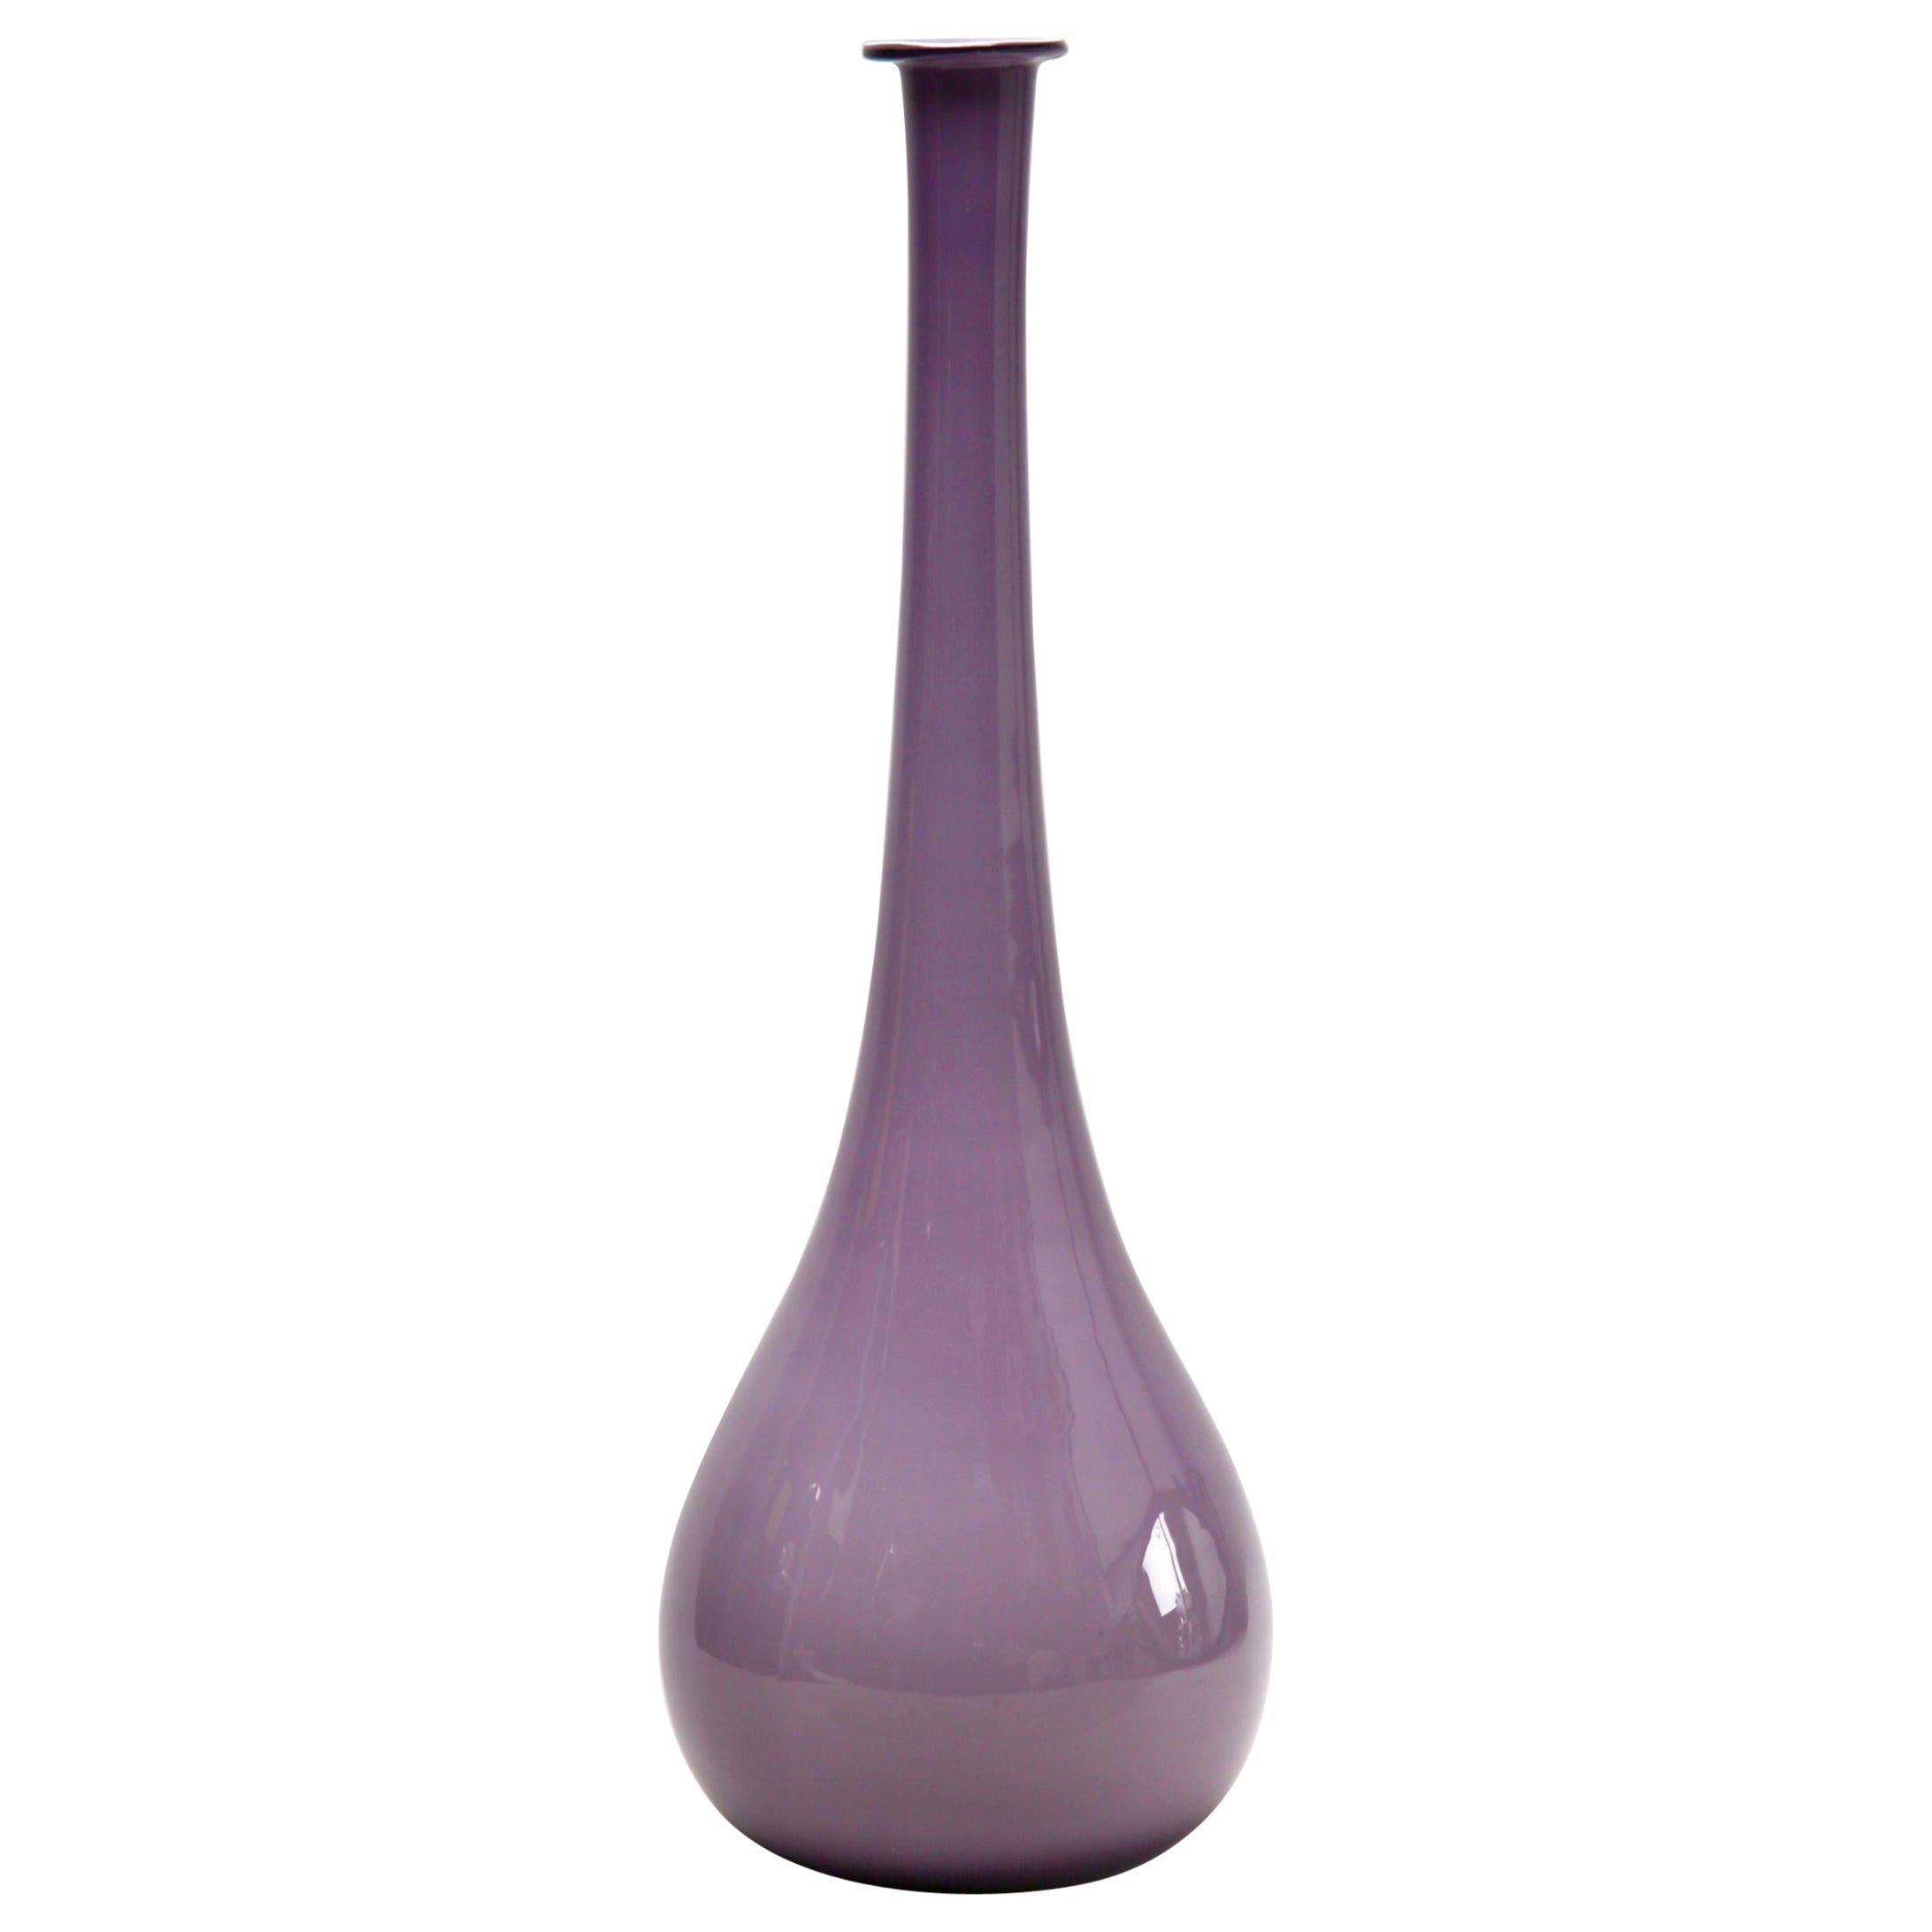 Vintage-Vase „Space Age“ aus Murano-Opal in Pastell, Soliflore, Florenz, 1955